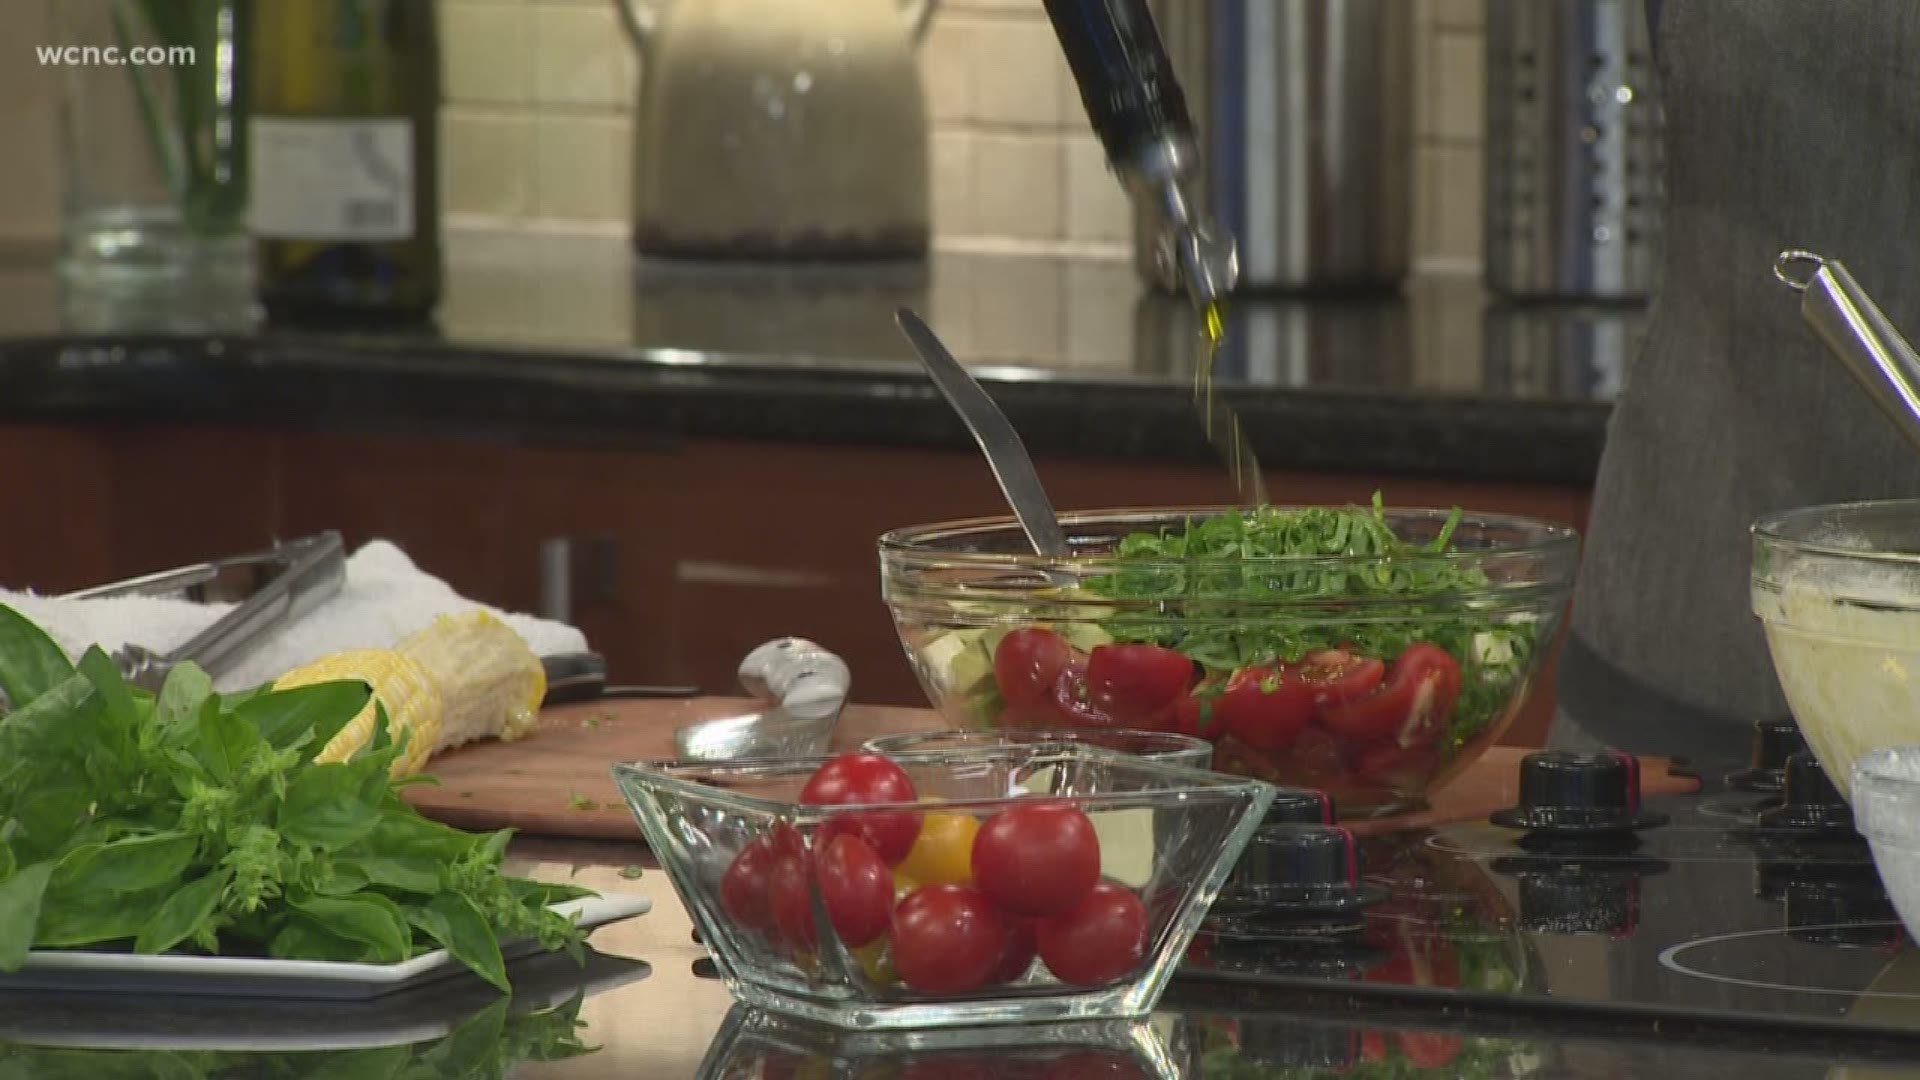 A classic Italian salad gets a southern twist by replacing rustic Italian bread with corn bread thanks to Chef Alyssa Wilen.